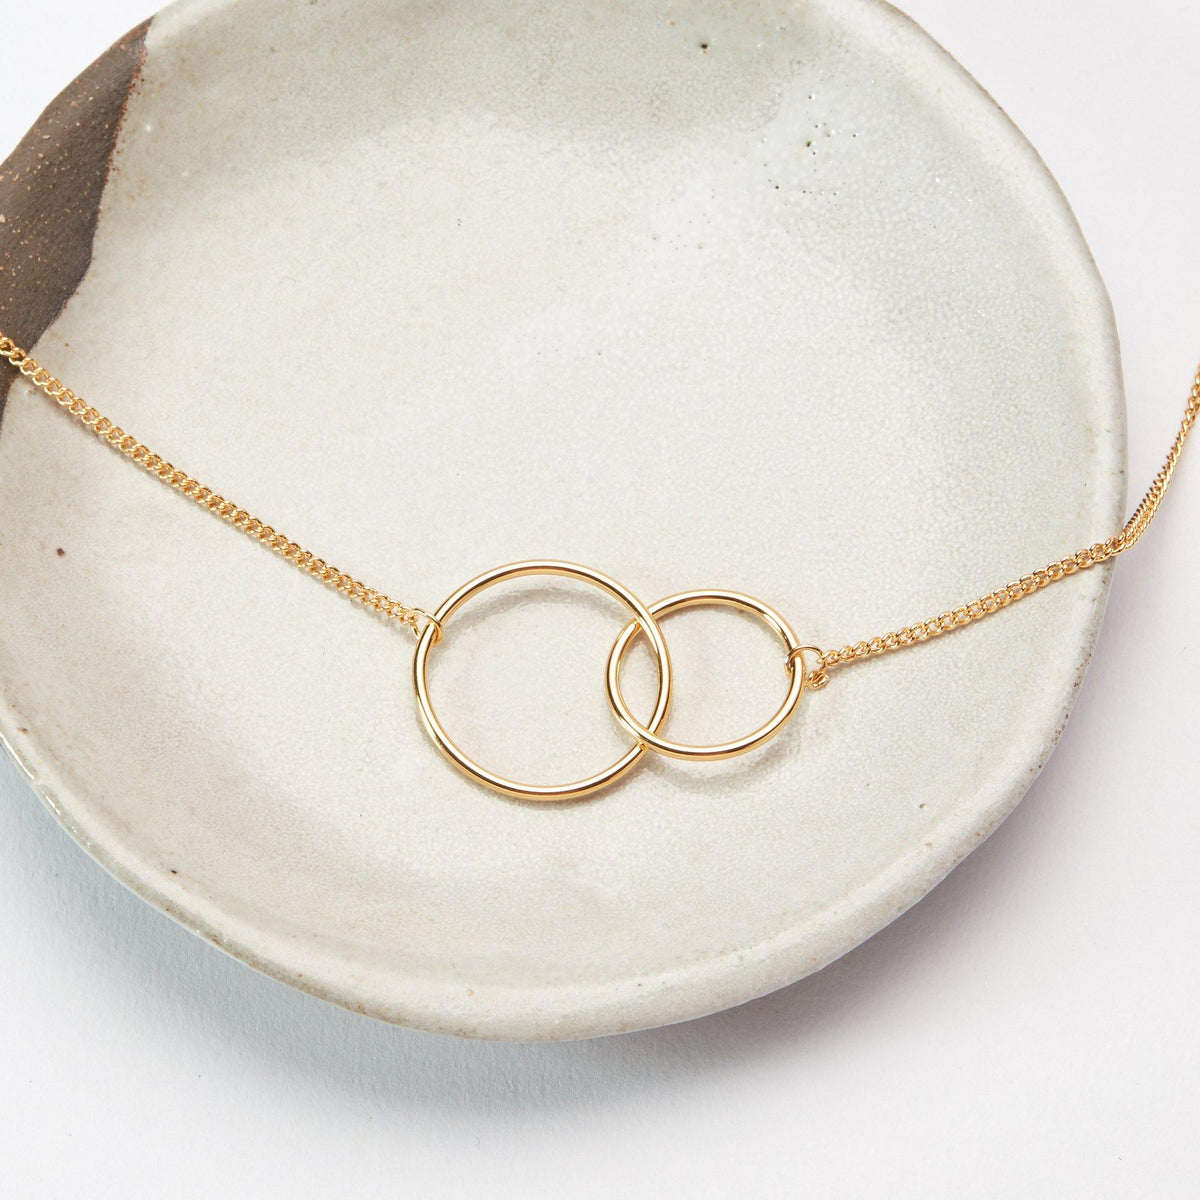 Two Interlocking Circles Necklace - Dear Ava, Jewelry / Necklaces / Pendants